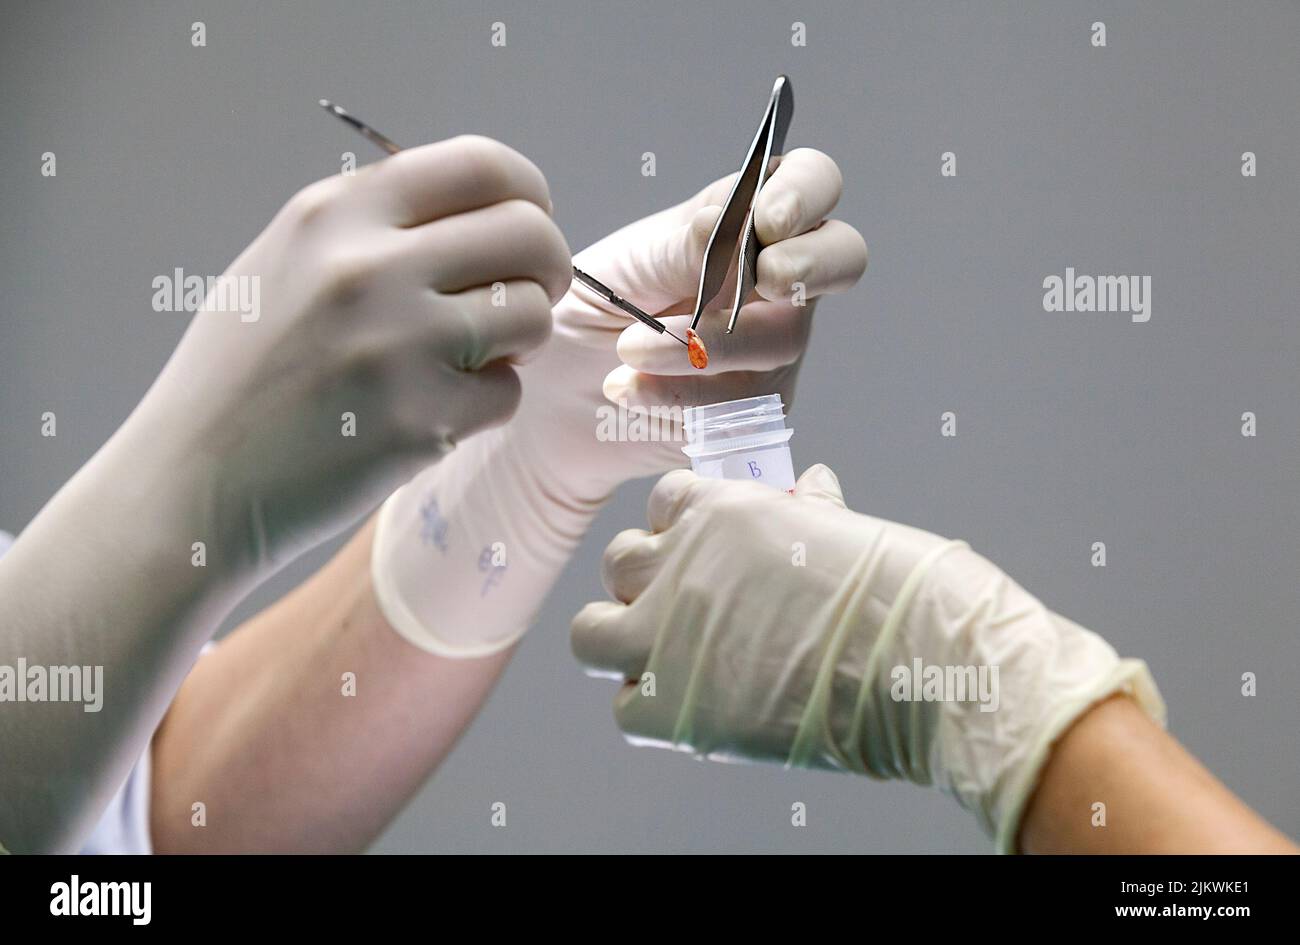 The dermatologist takes samples from a suspicious mole. Stock Photo